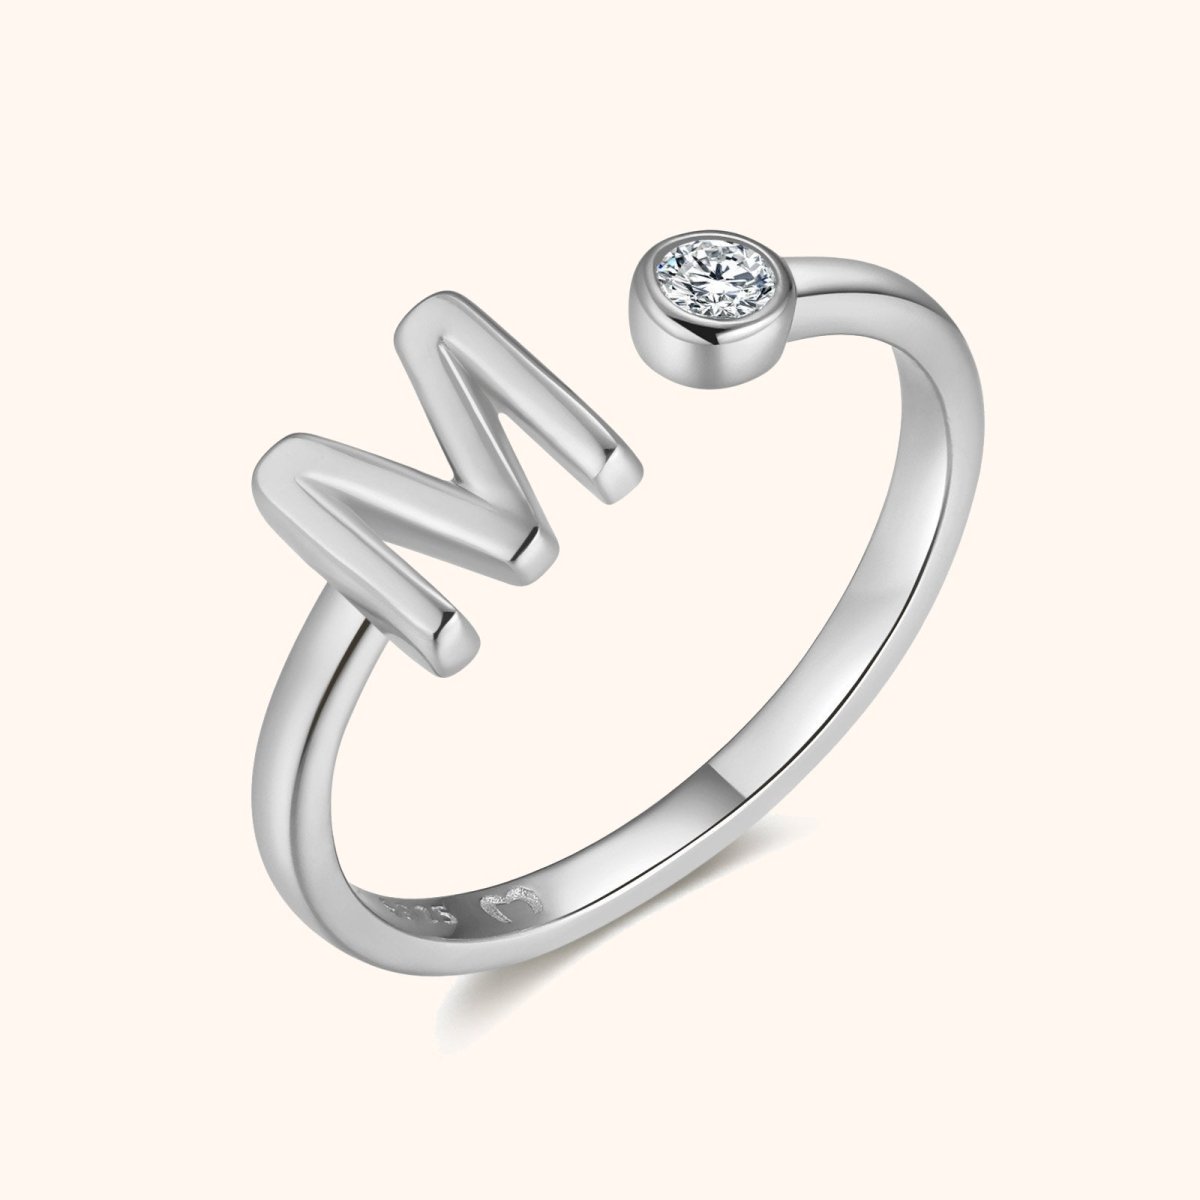 "Top Letter" Ring - Milas Jewels Shop